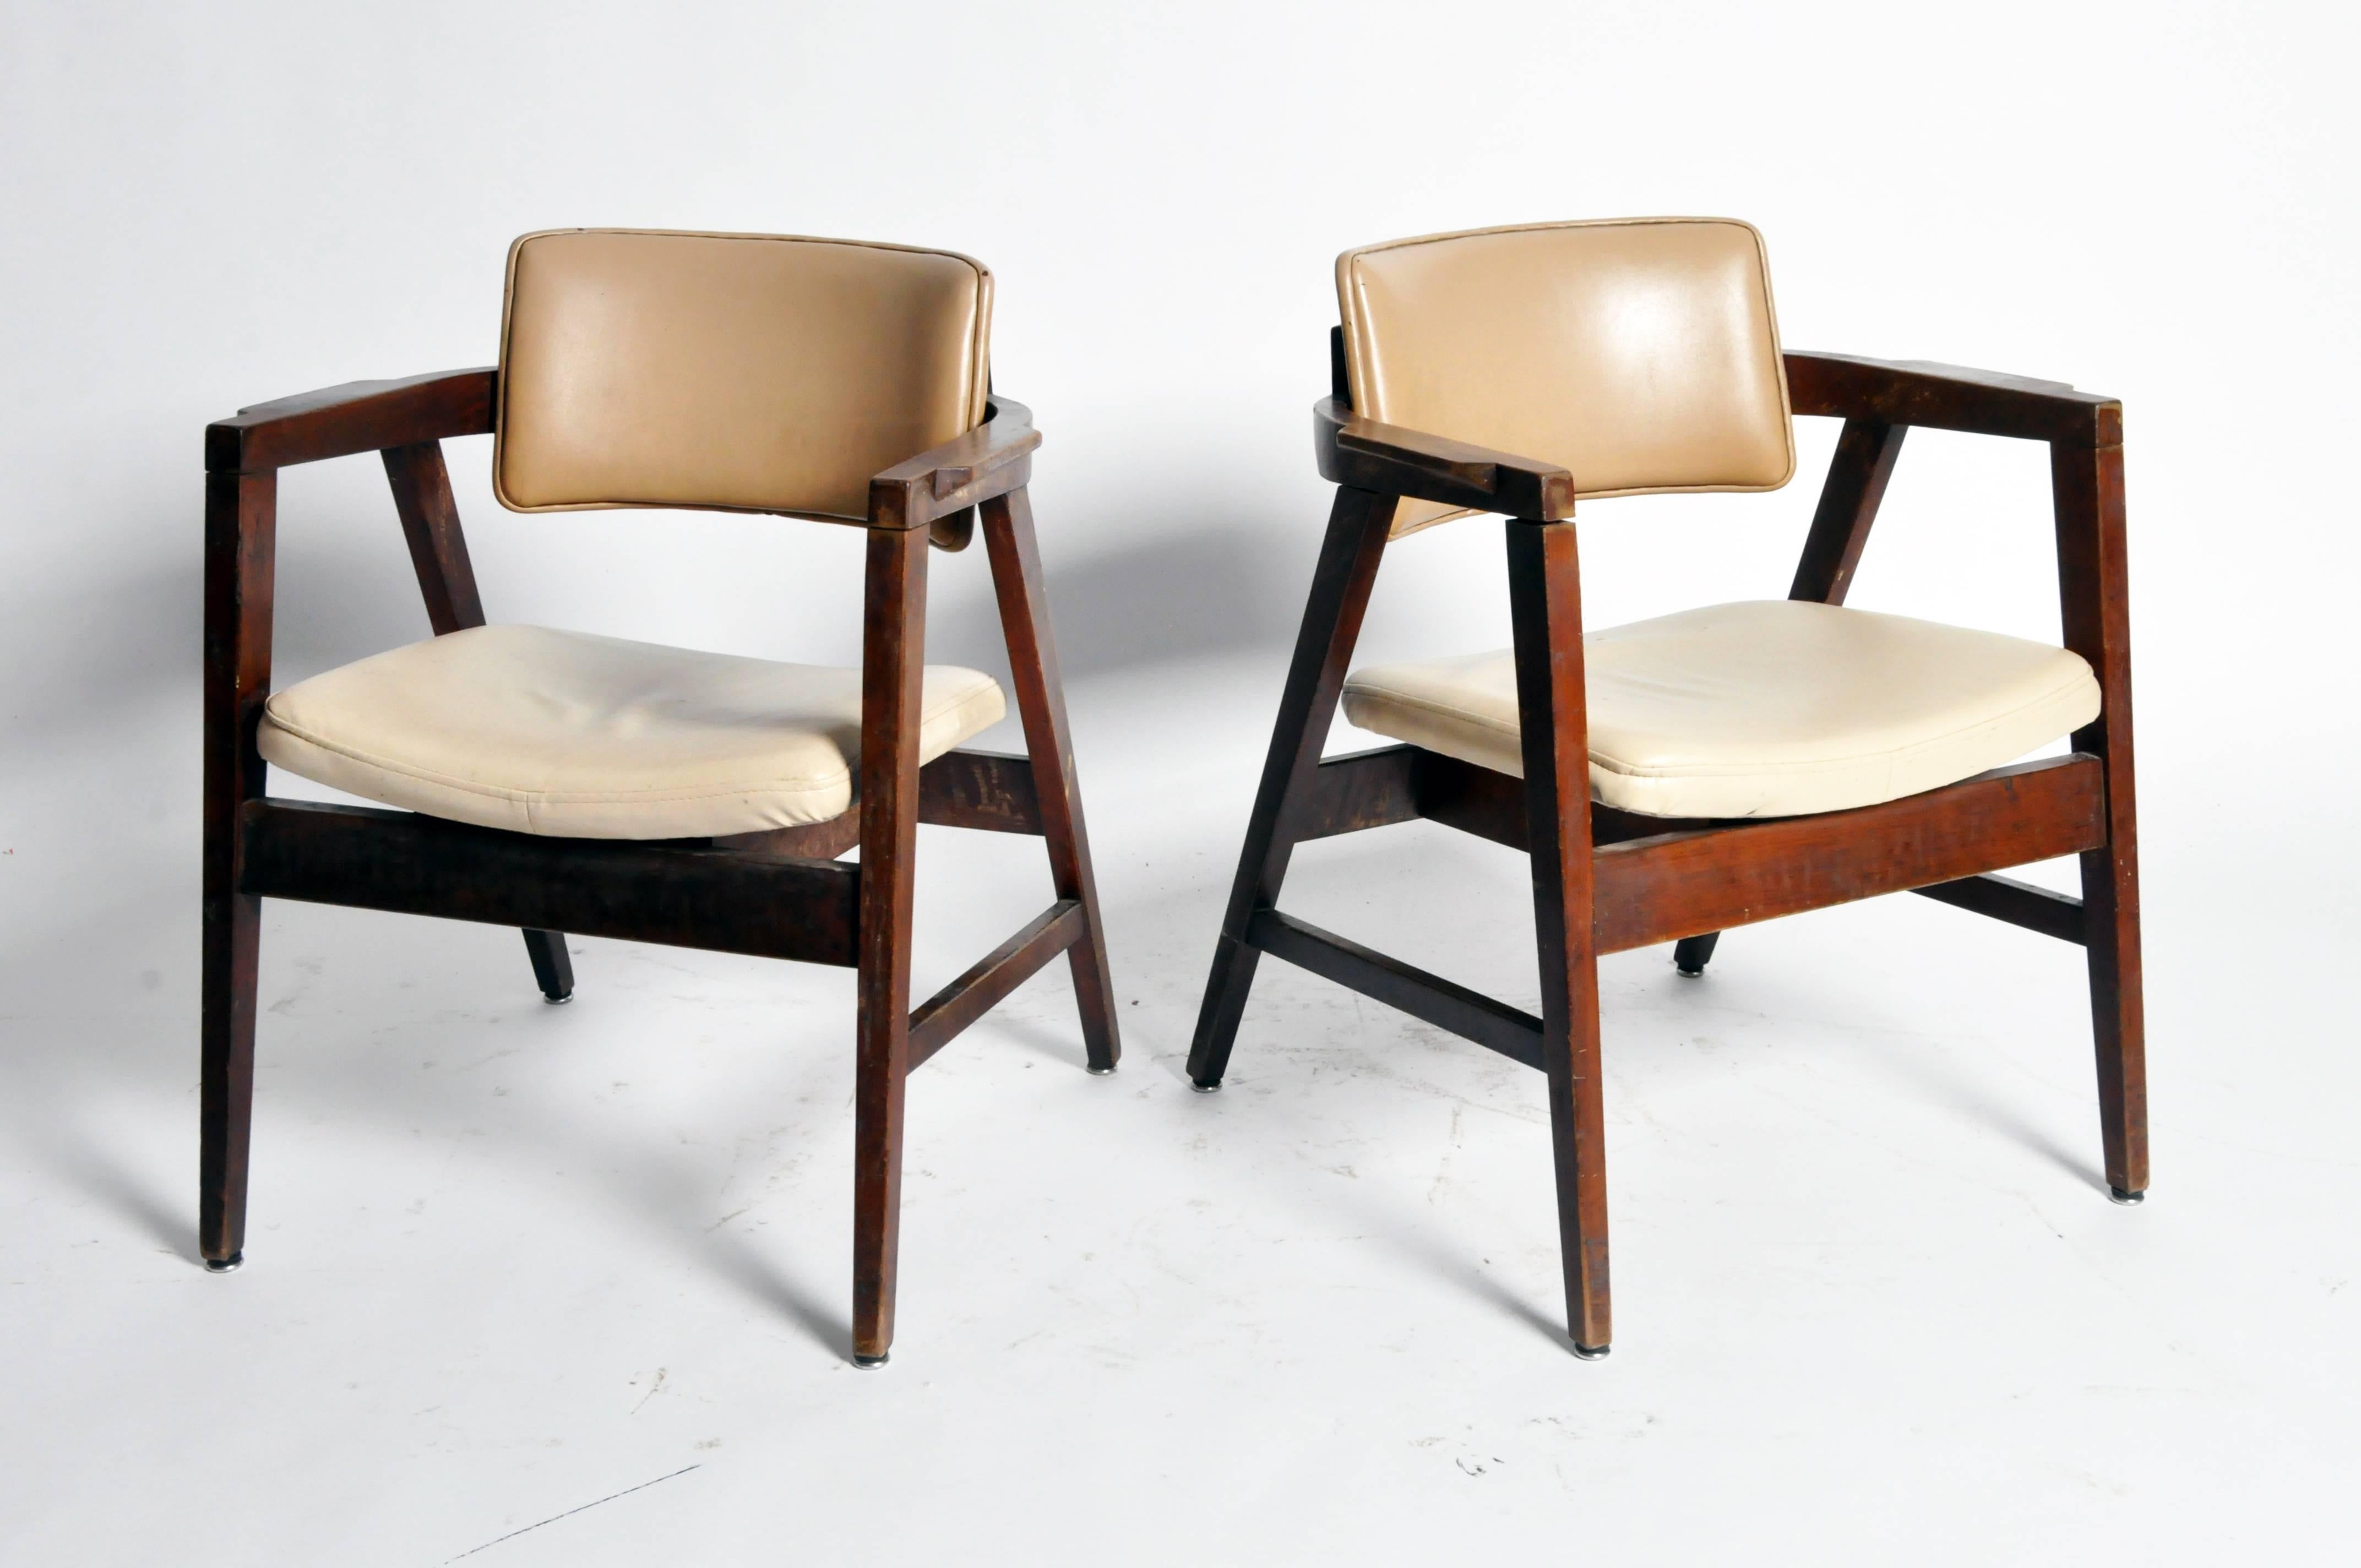 These Mid-Century armchairs are from France and are made from solid walnut, circa 1950.